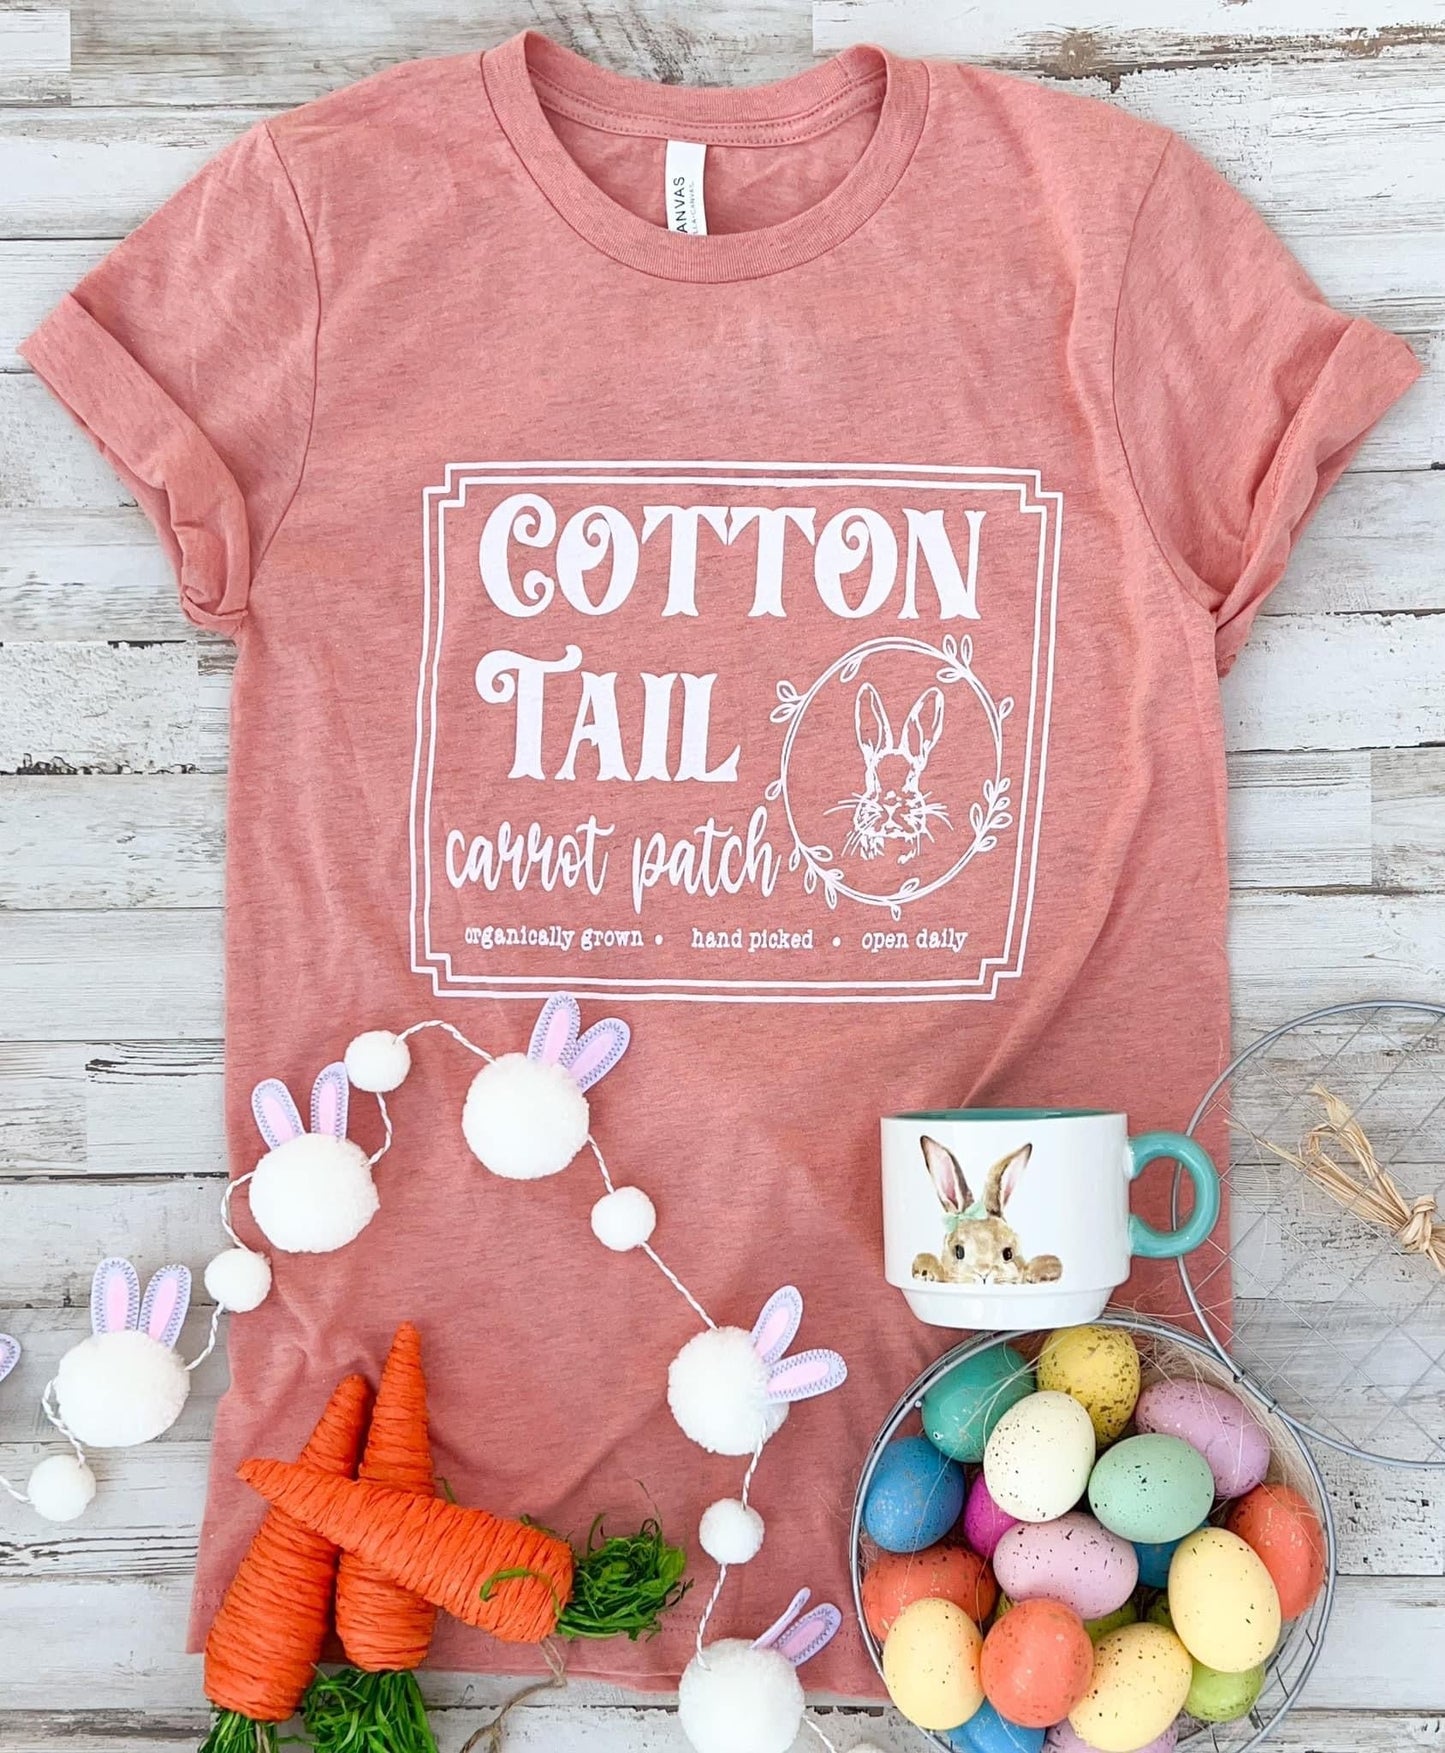 Cotton Tail Carrot Patch Tee (Sunset)